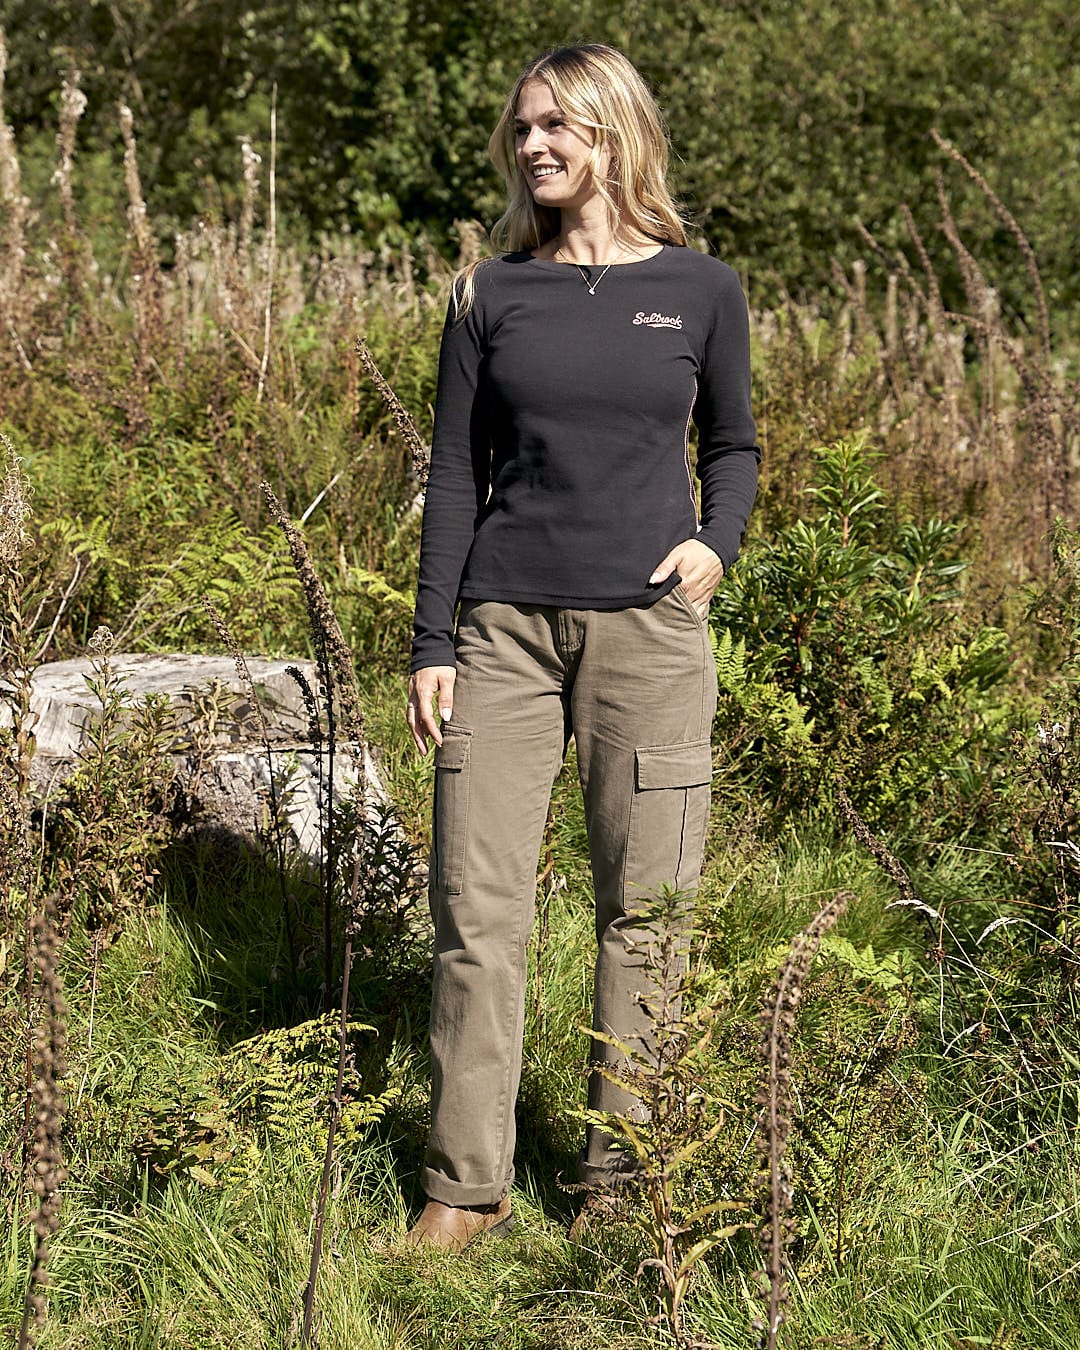 A woman standing in a field wearing a Saltrock - Rory Womens Long Sleeve Waffle T-Shirt - Black and cargo pants.